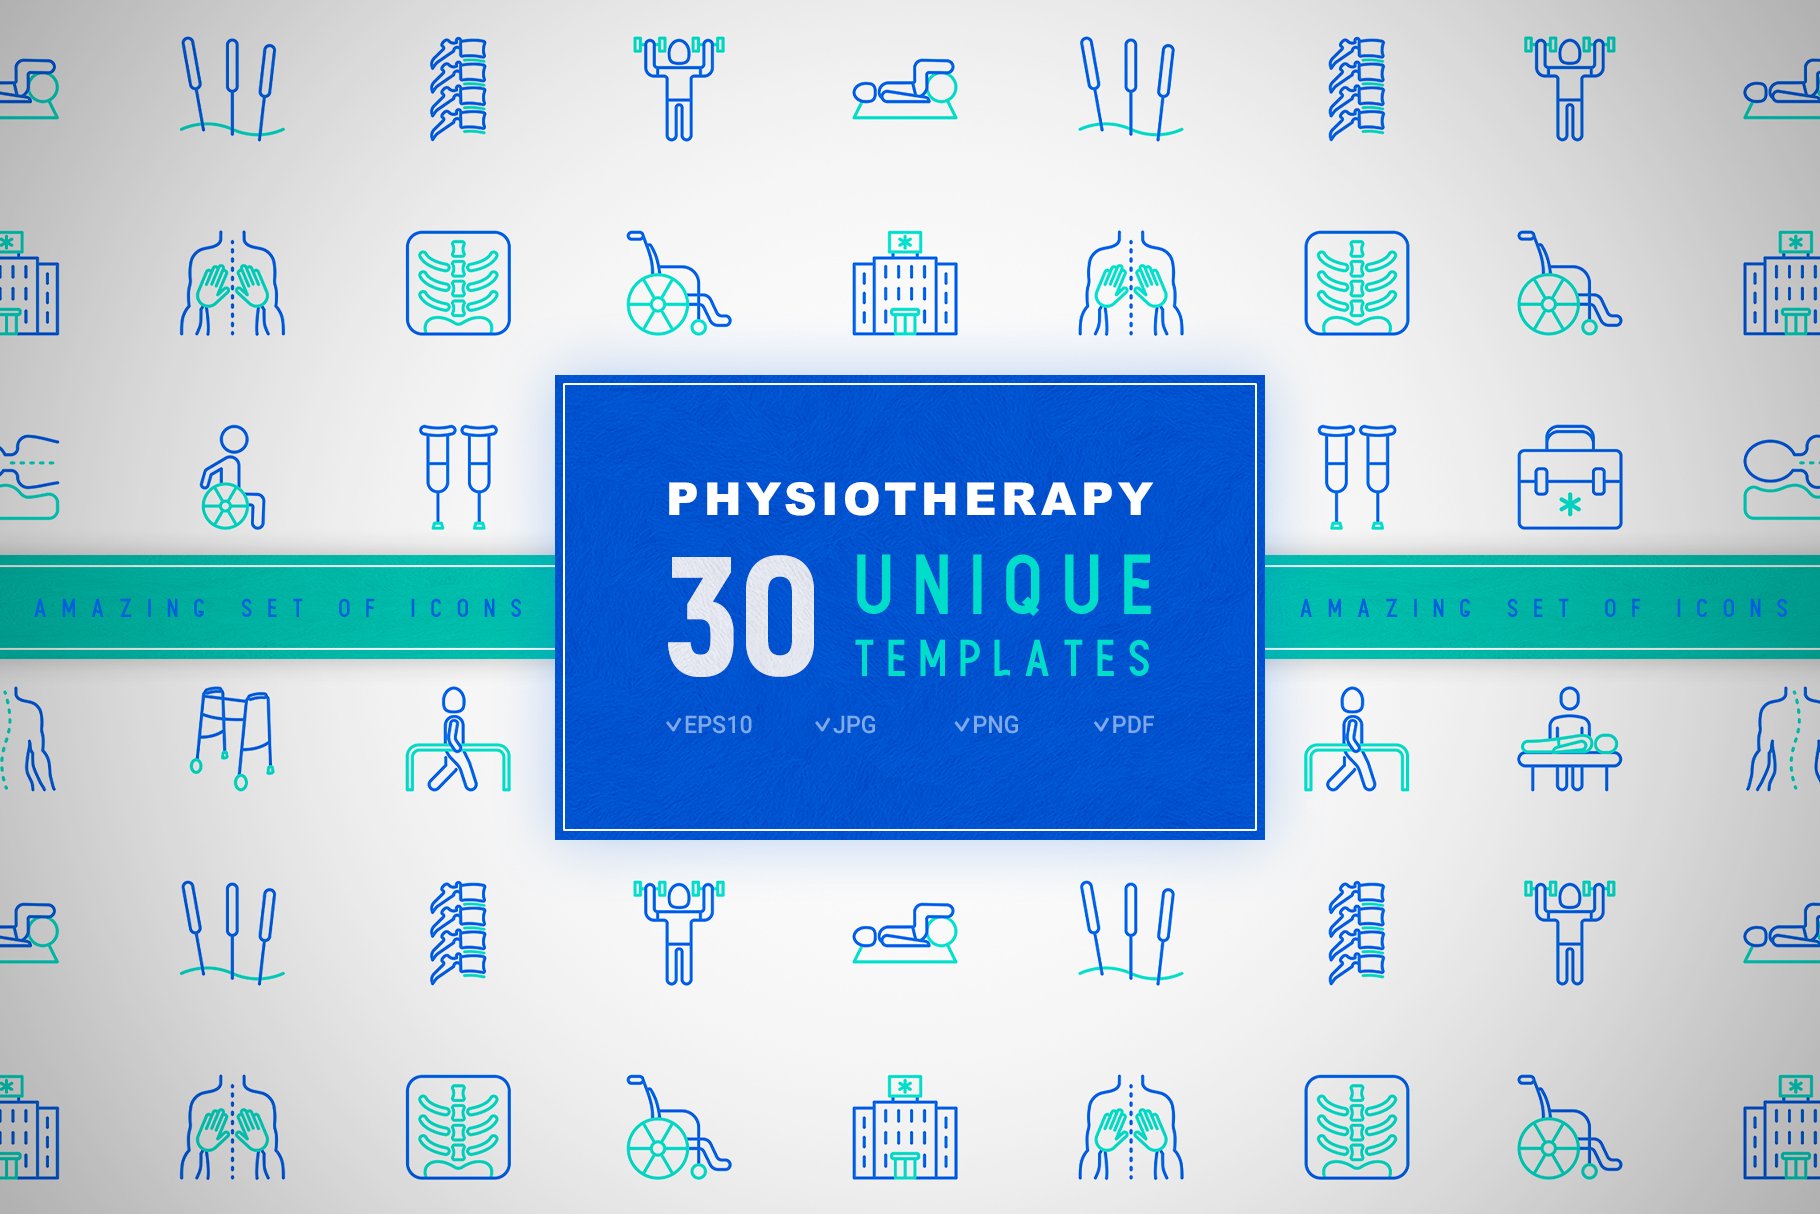 Physiotherapy Icons Set | Concept cover image.